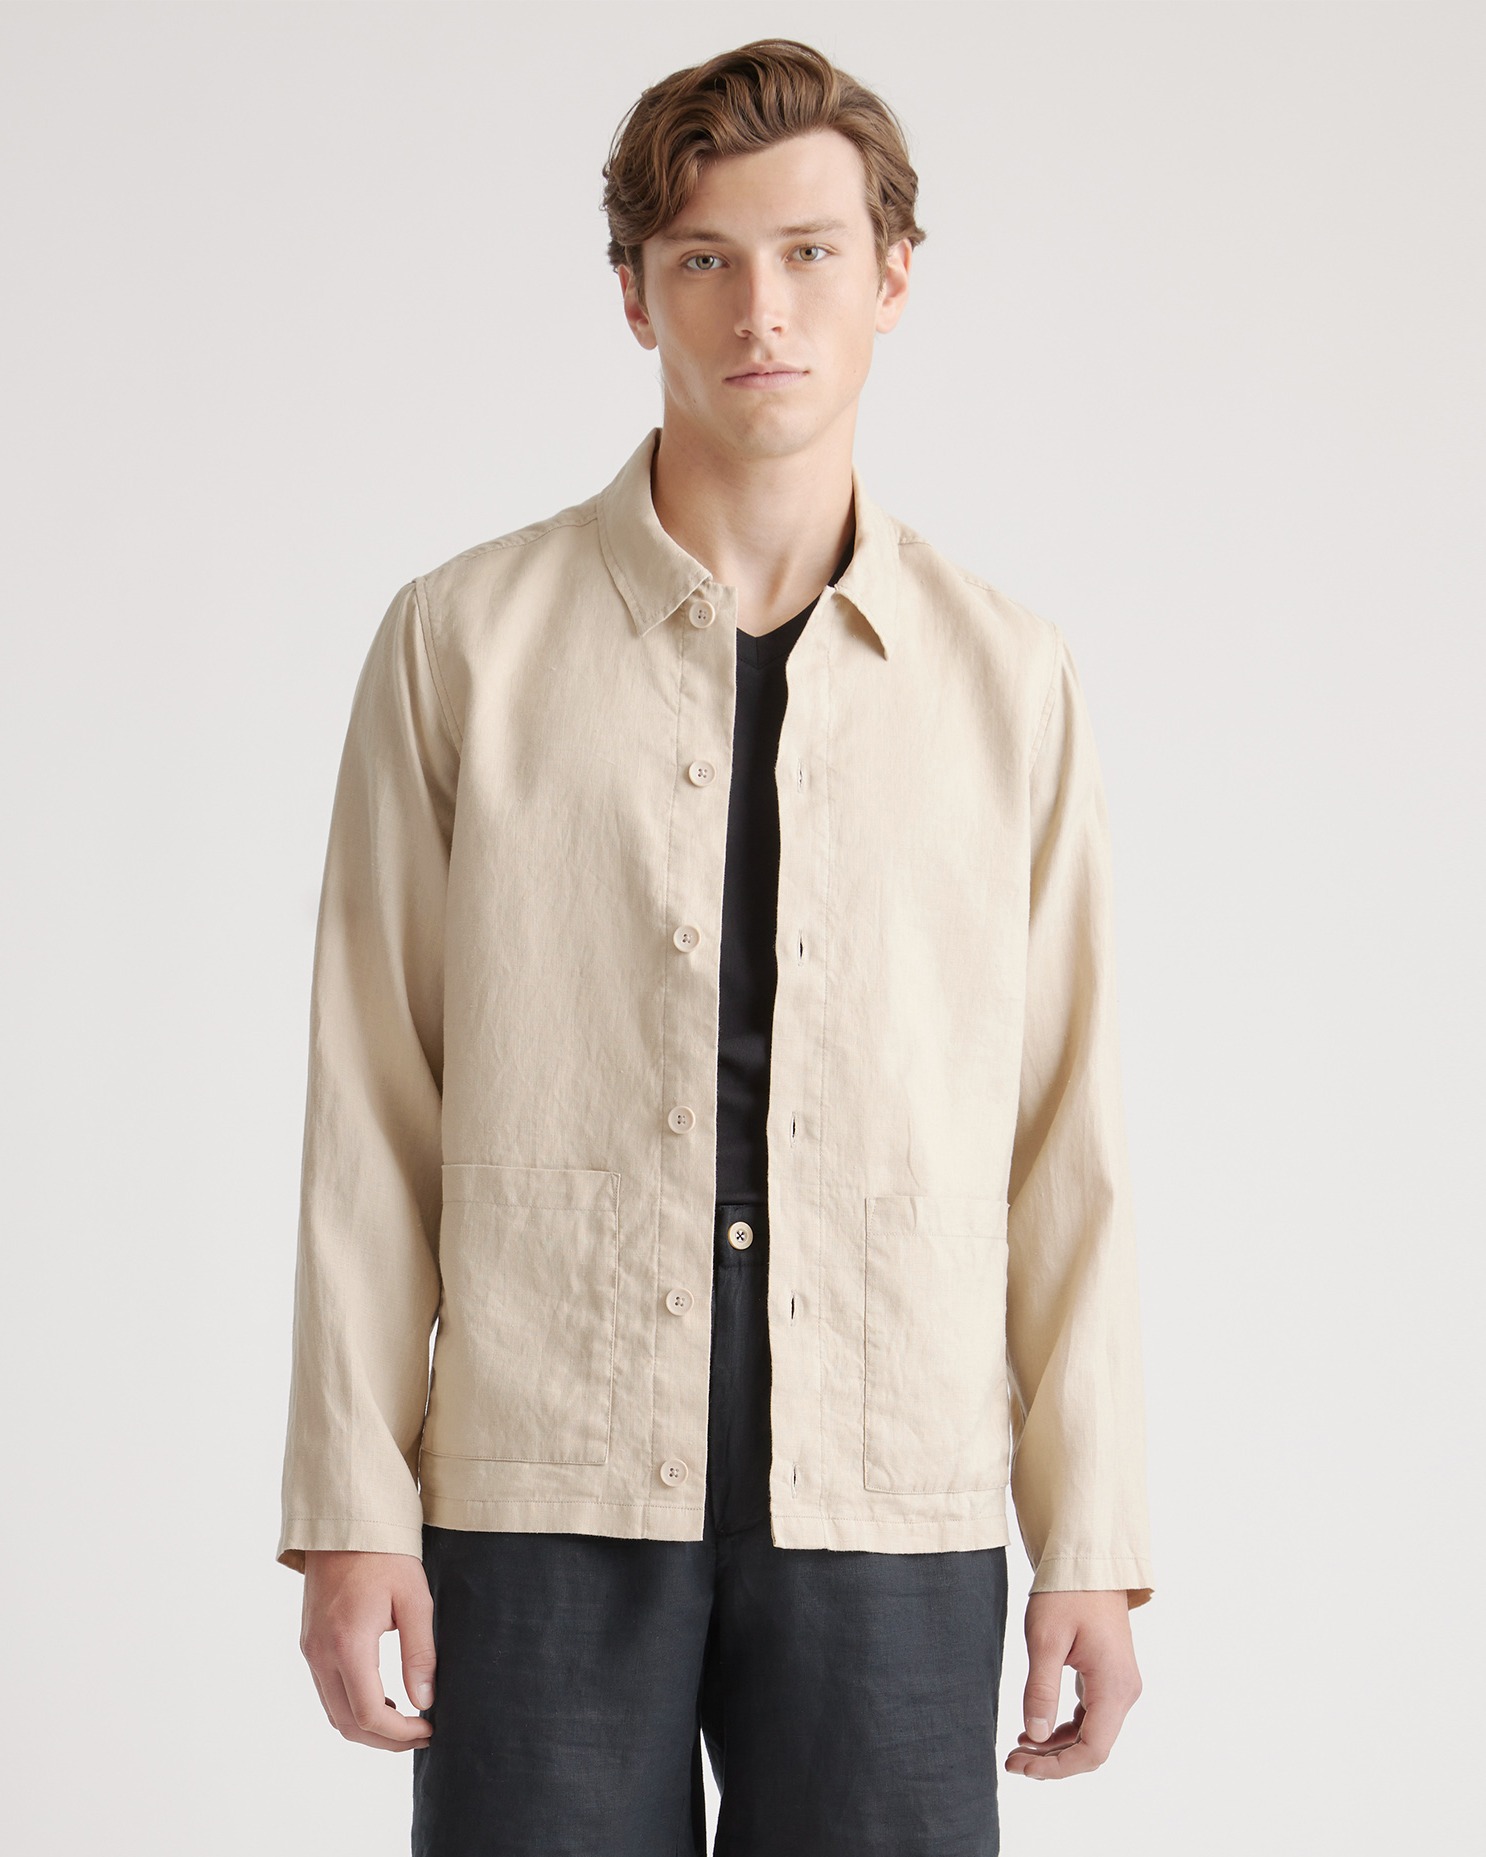 Quince: Back In Stock: The $35 European Linen Shirt